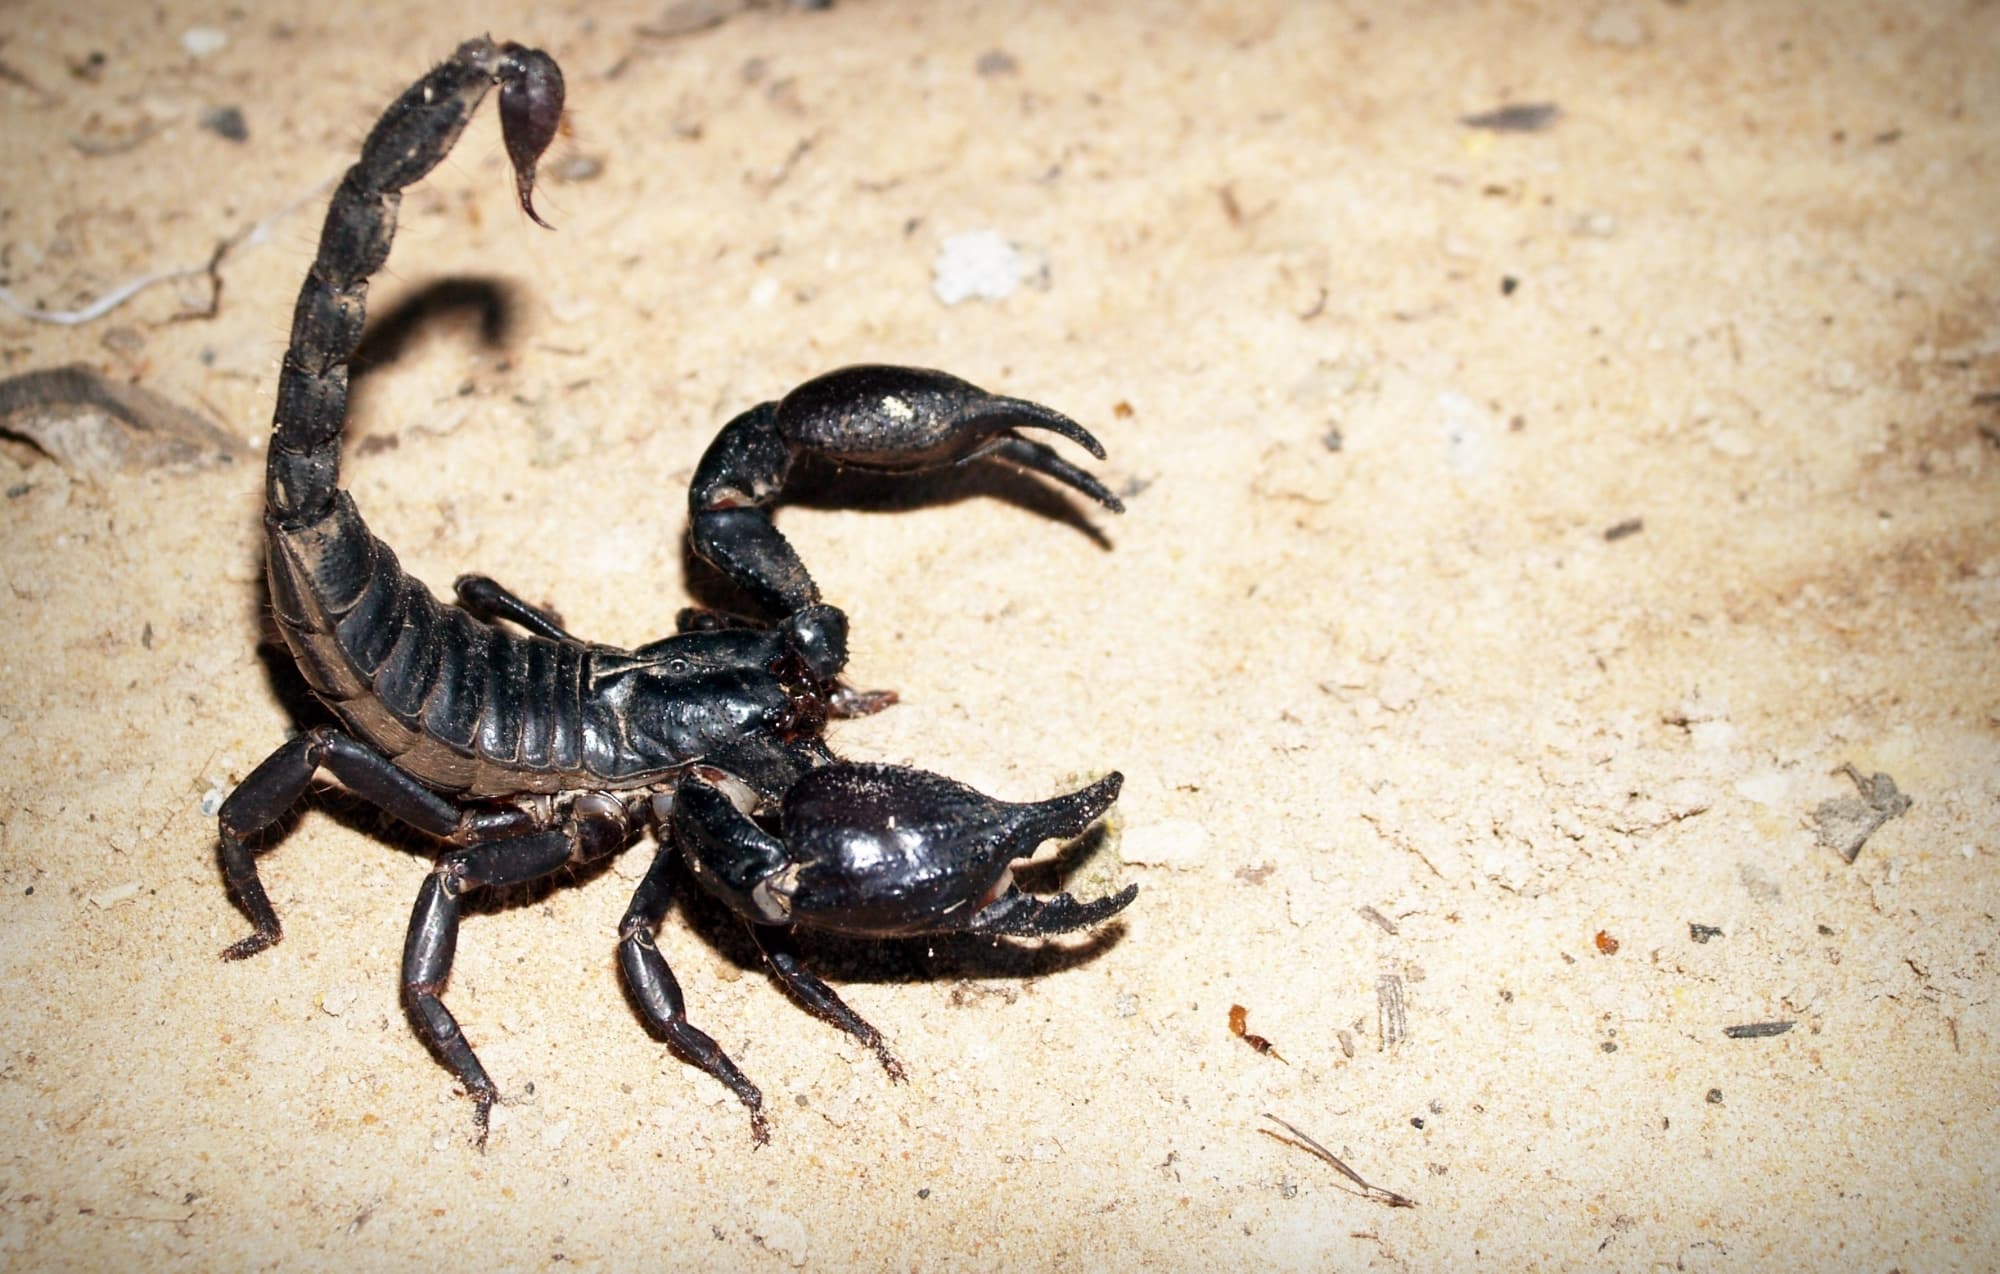 how many legs does a scorpion have